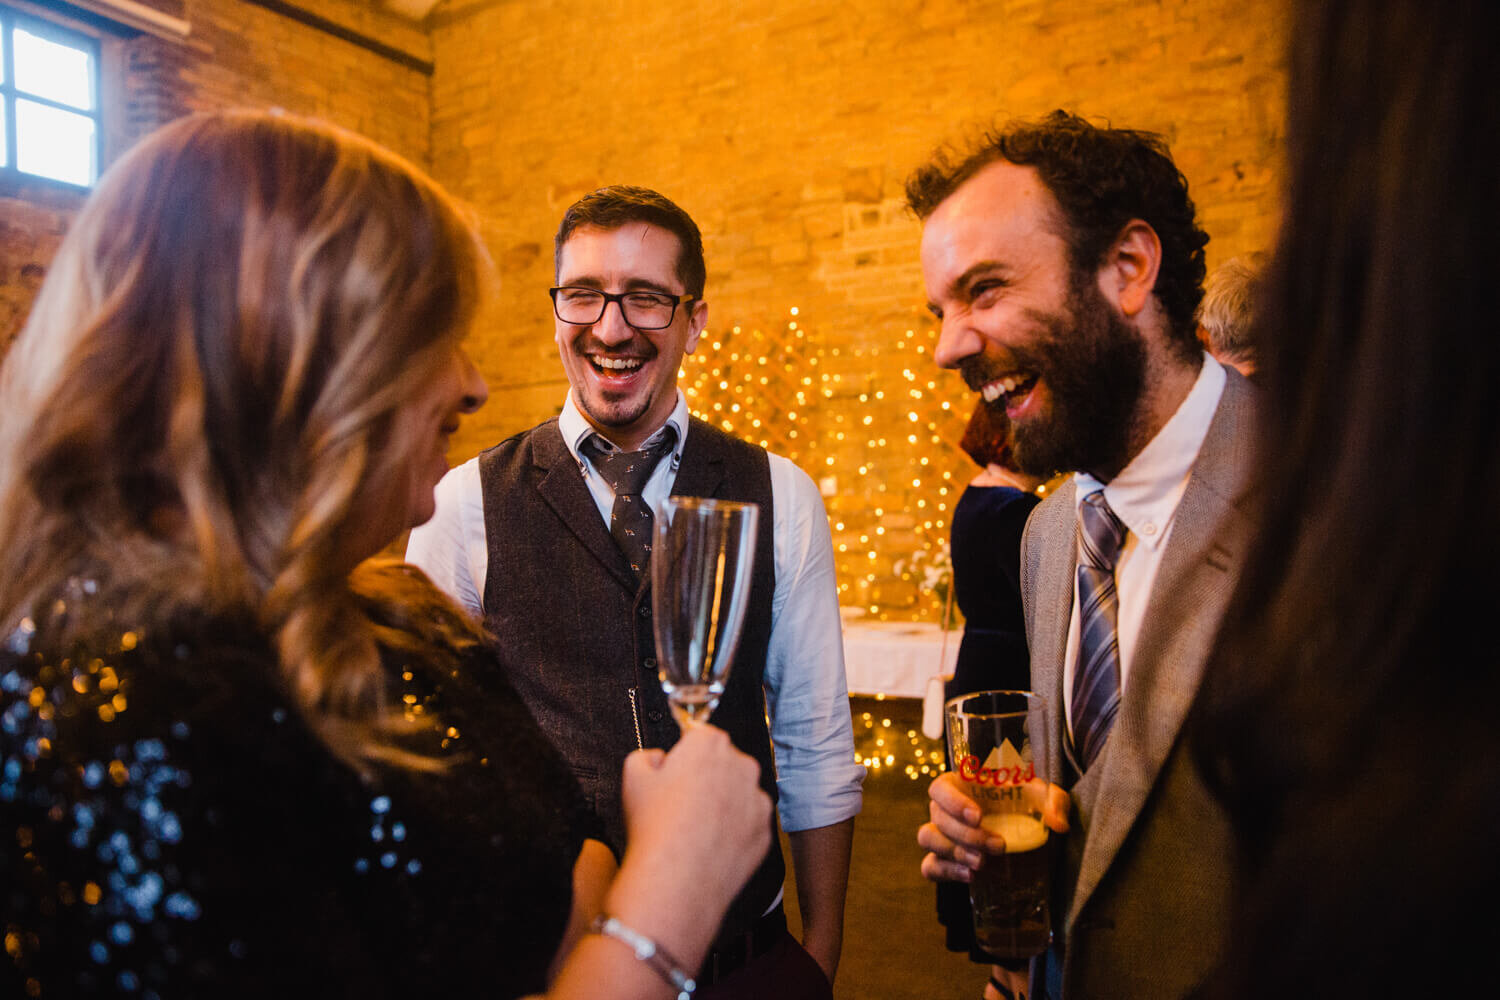 wedding guests share jokes together during cocktail hour